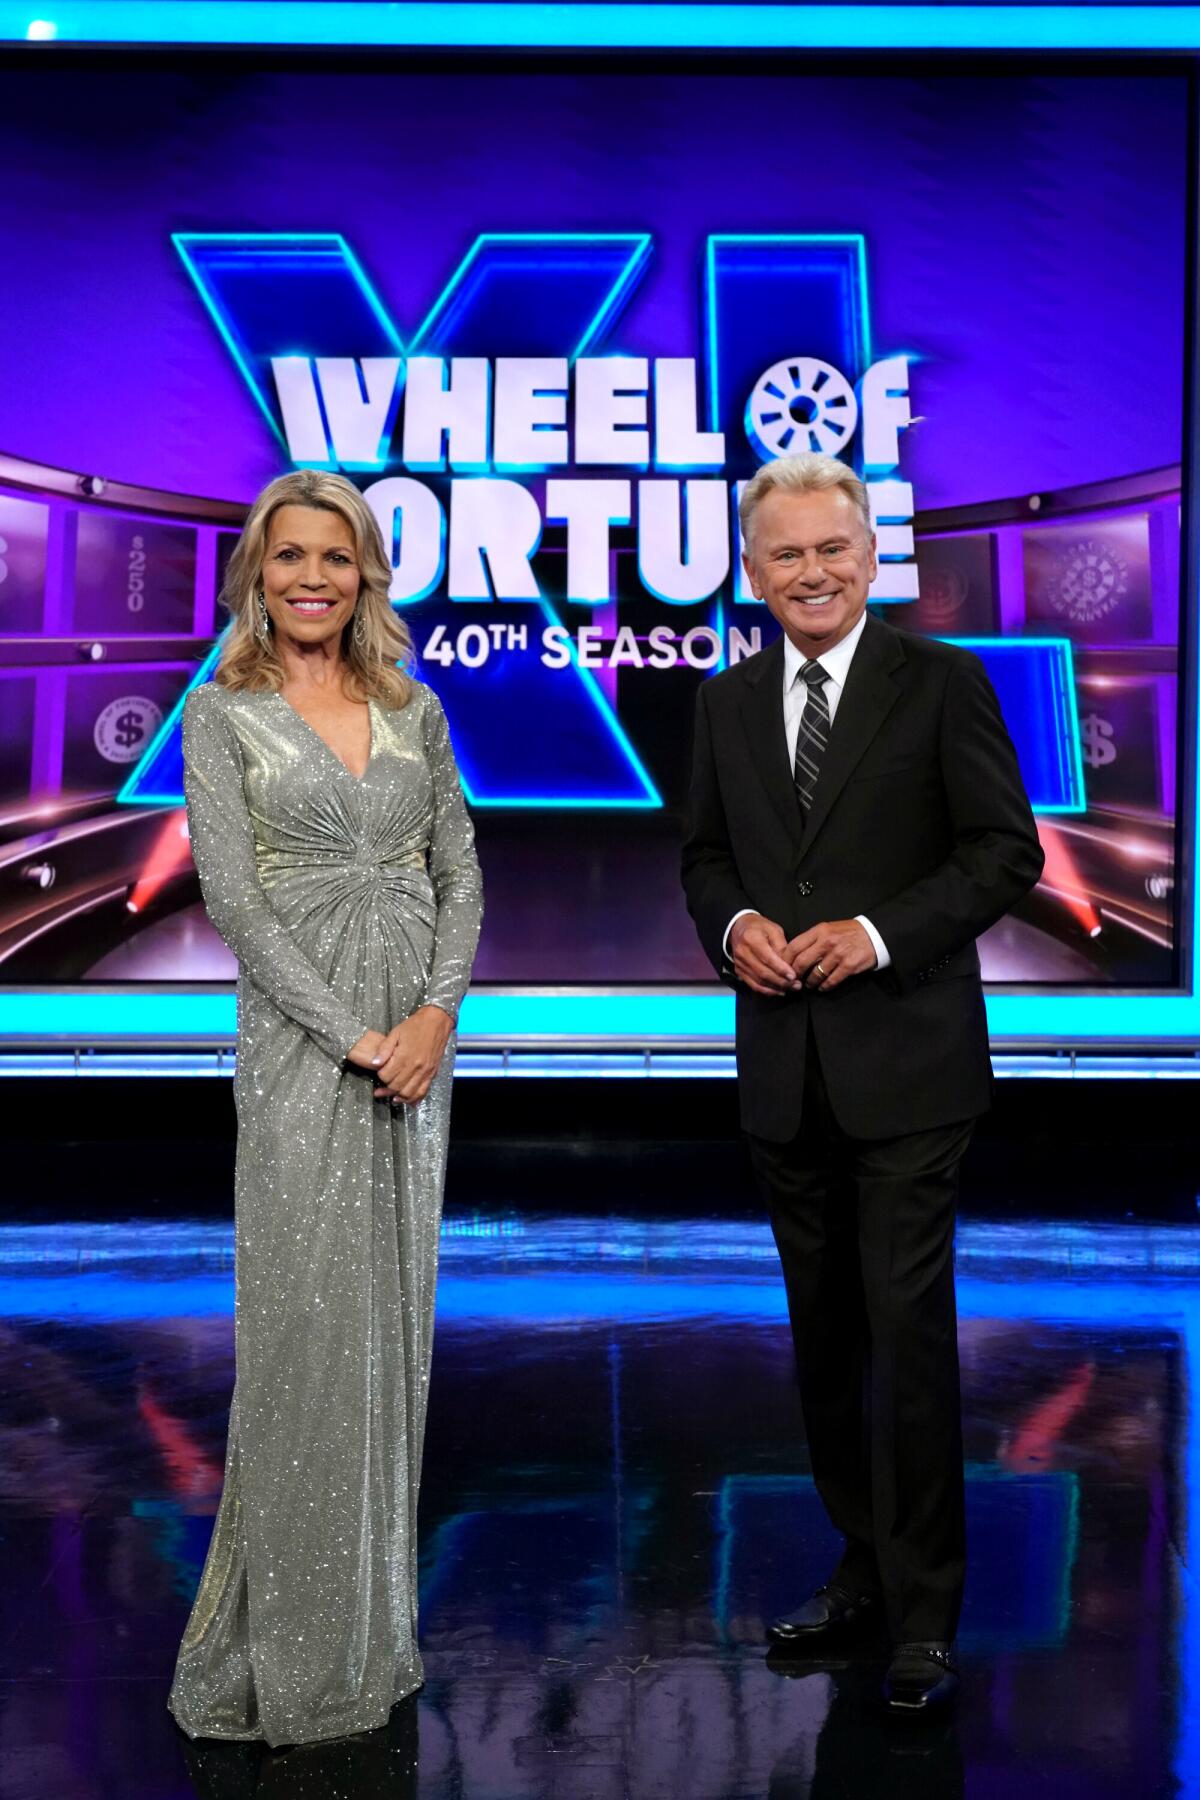 Vanna White, in a shimmery silver gown, and Pat Sajak, in a suit, stand on the "Wheel of Fortune" stage.